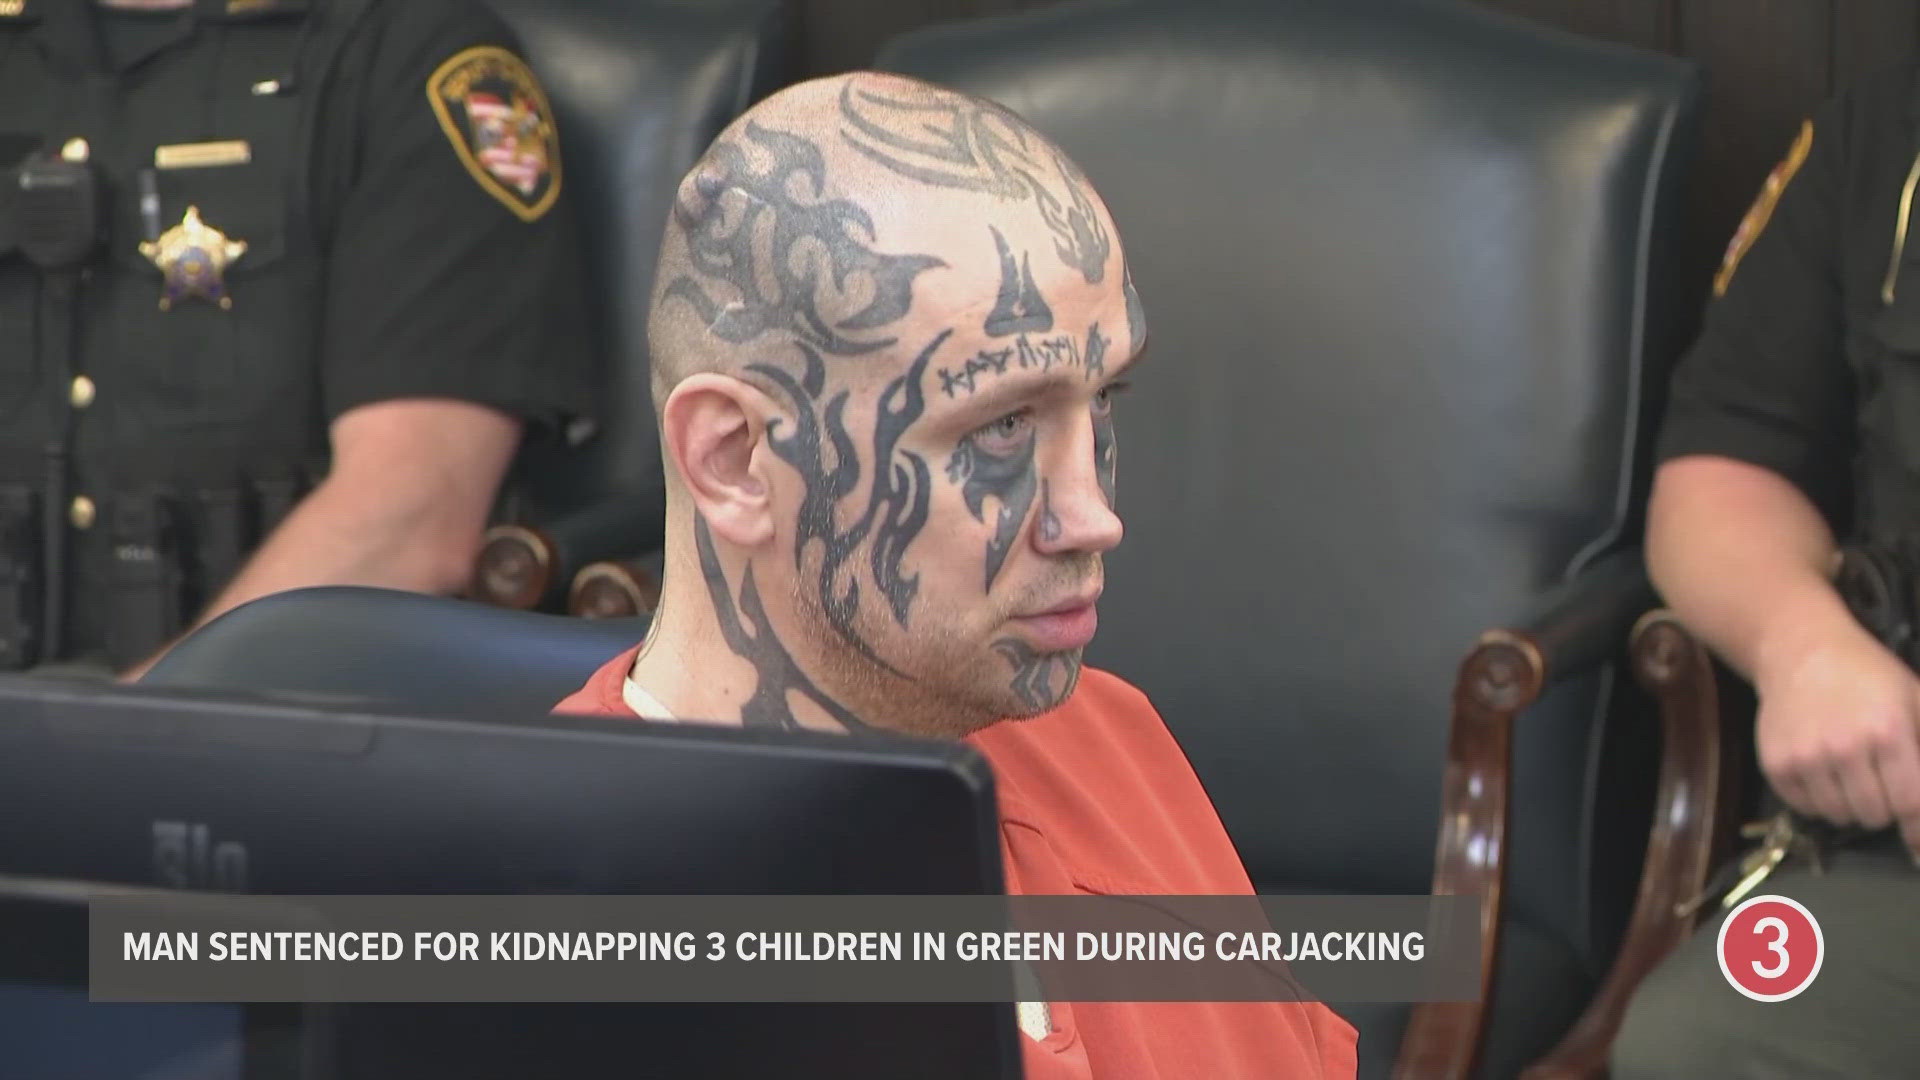 Mark Carlson was sentenced to 15-19.5 years in prison after he pleaded guilty to kidnapping three children during a carjacking in Green.